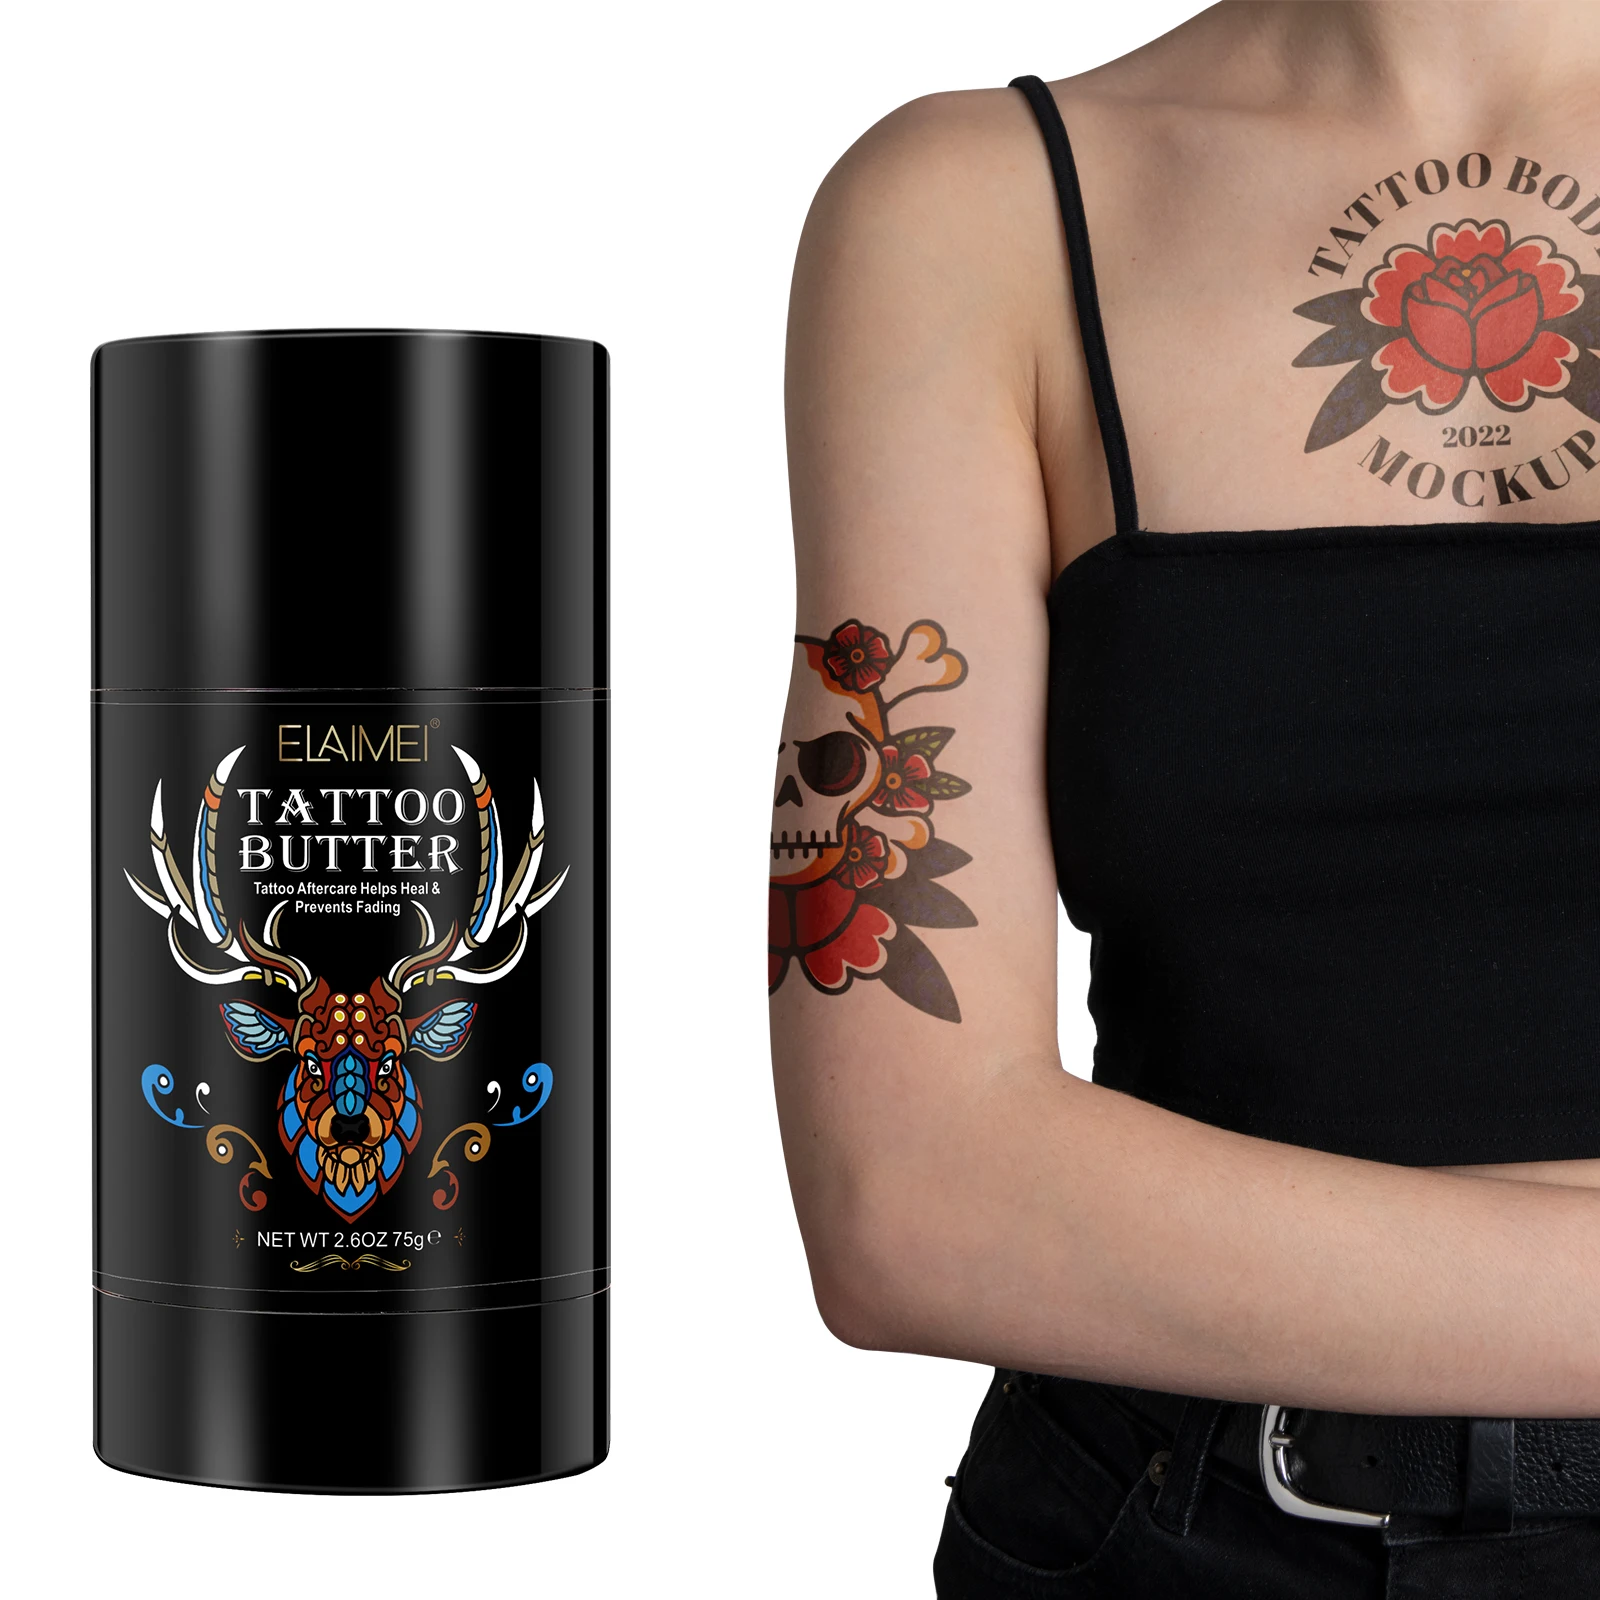 

ELAIMEI Private Label Body Art Care Brightens Heals Fresh Tattoo Aftercare Butter Tattoo Balm